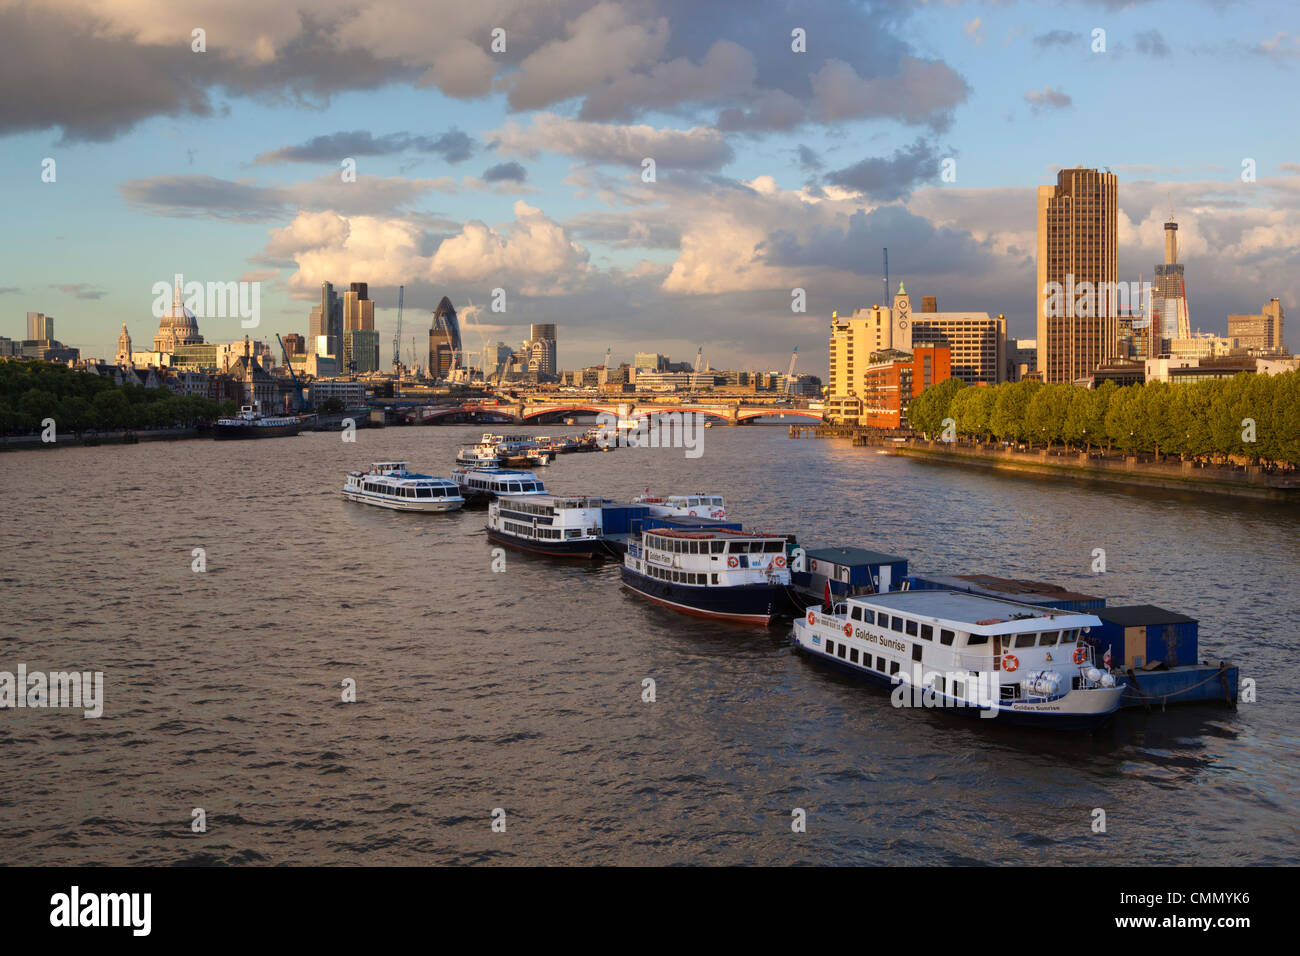 View along River Thames to Blackfriars Bridge and St. Paul's Cathedral, London, England, United Kingdom, Europe Stock Photo